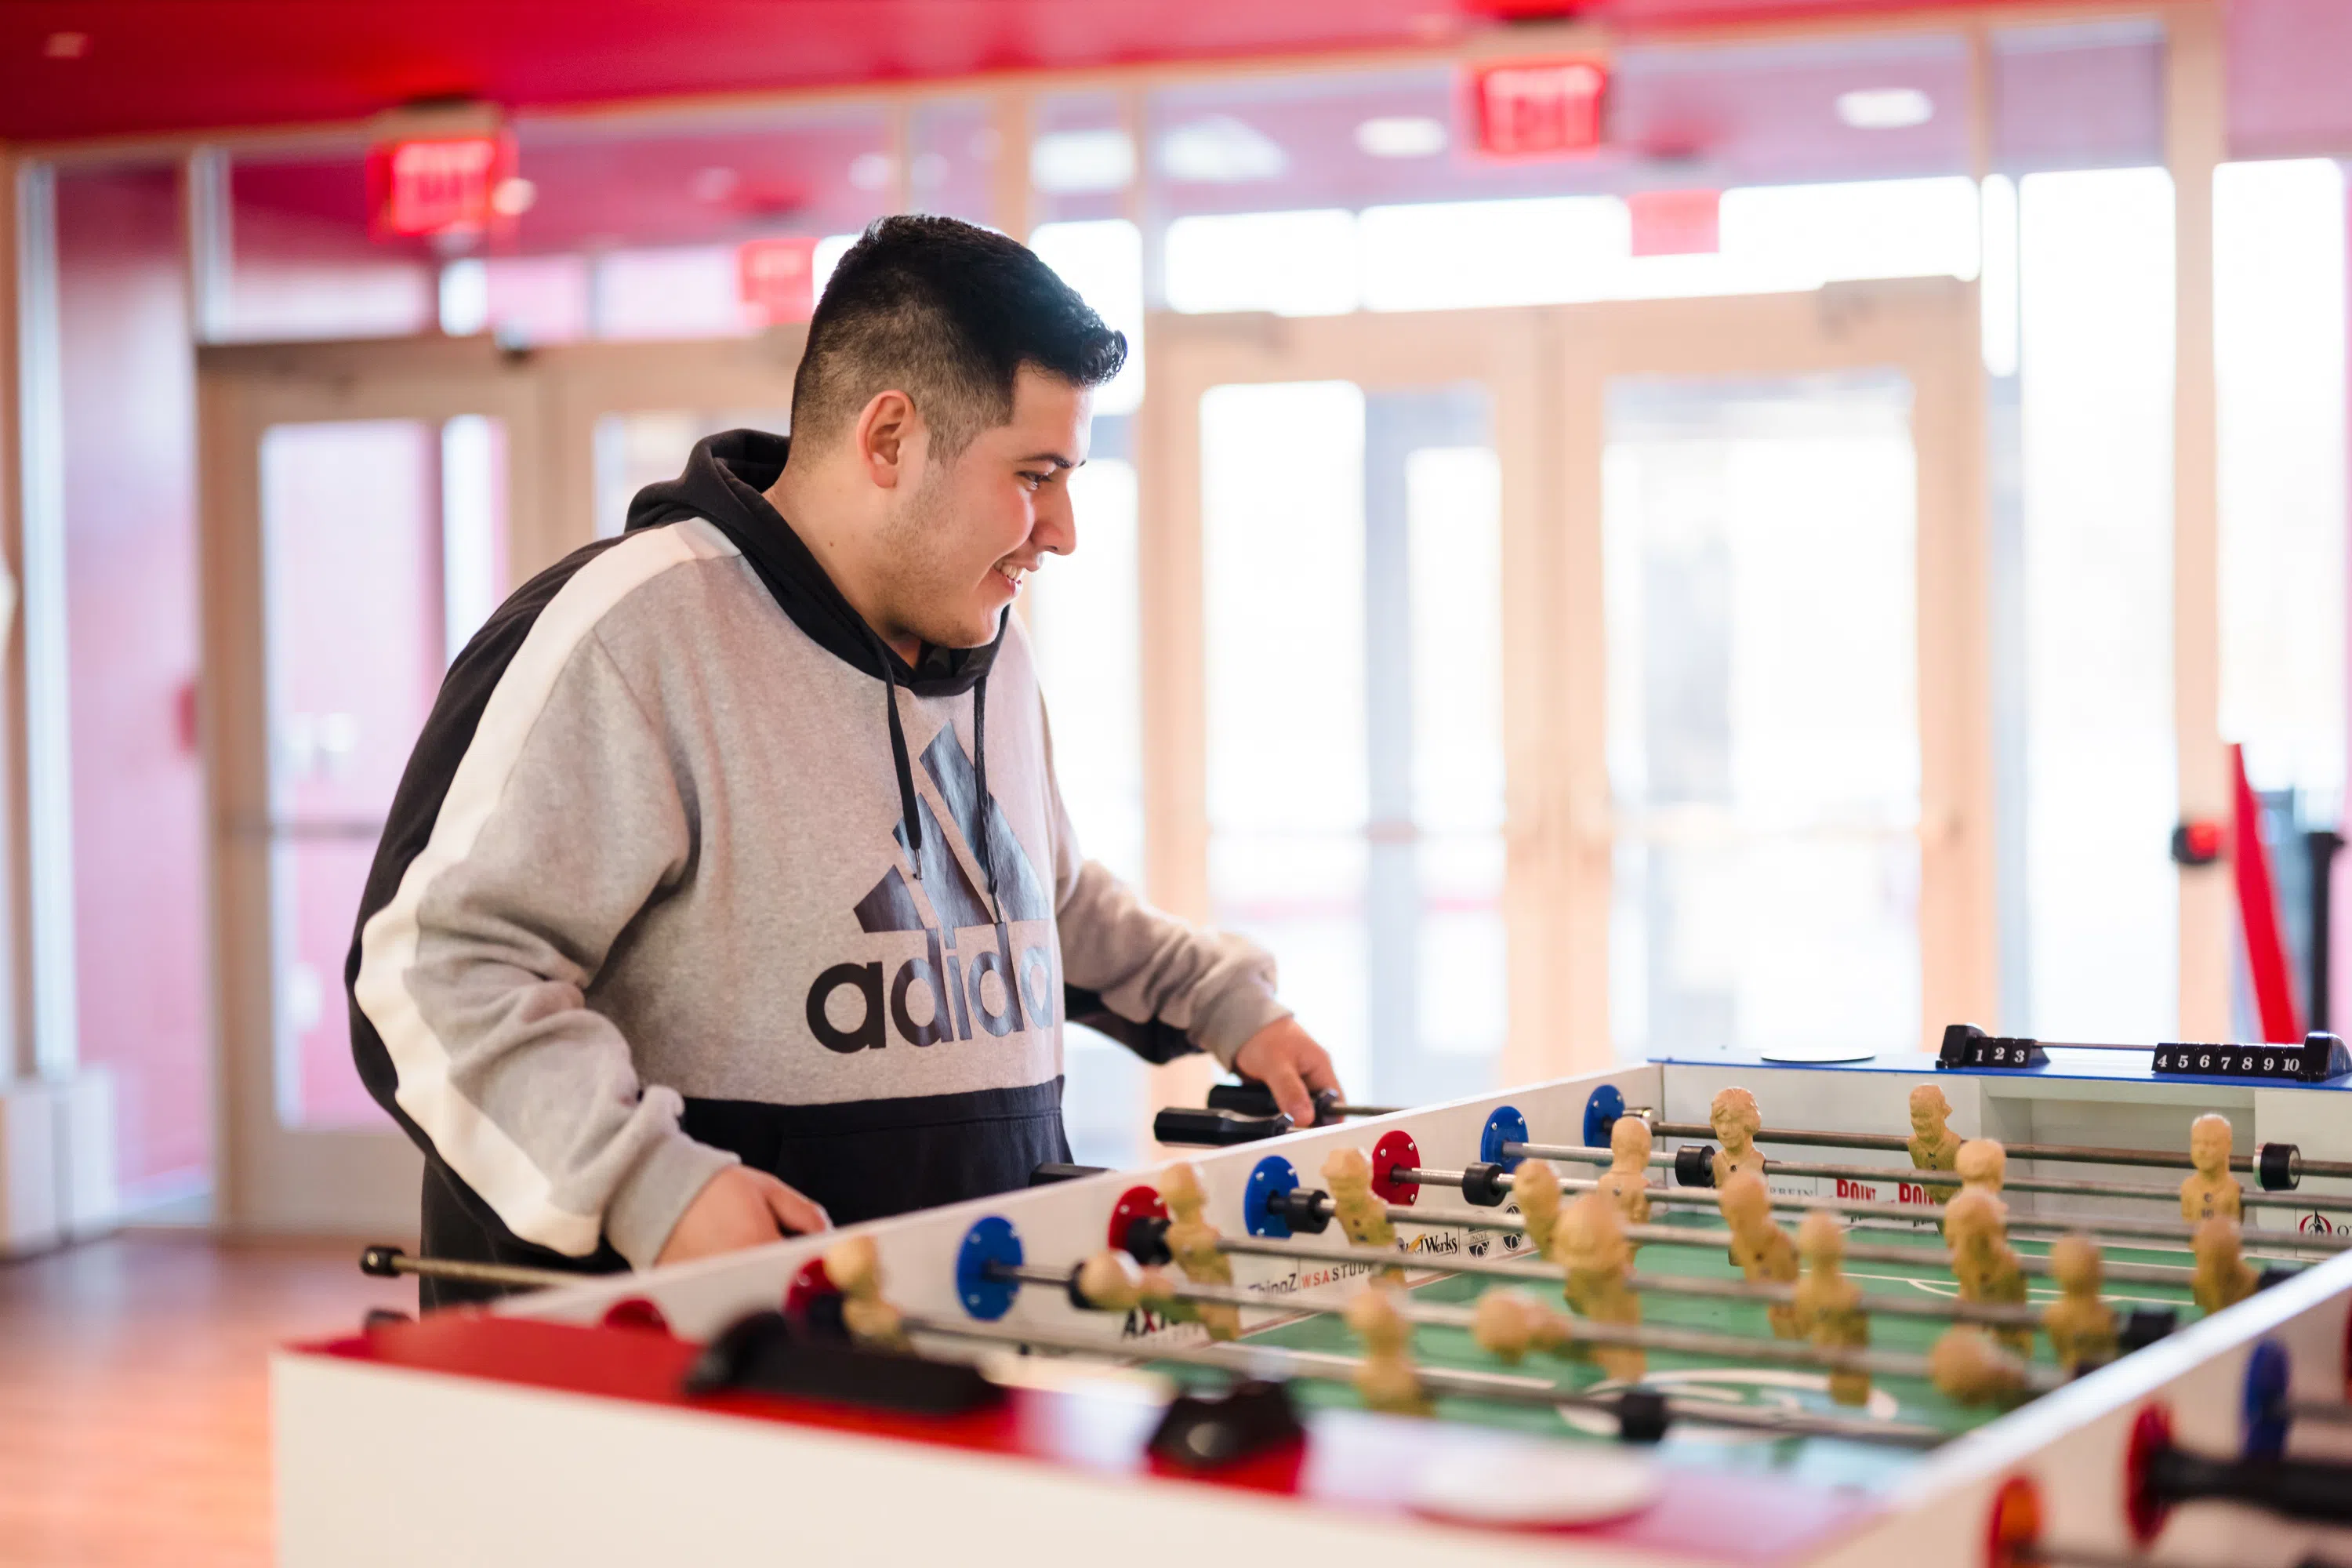 A man is playing foosball happily